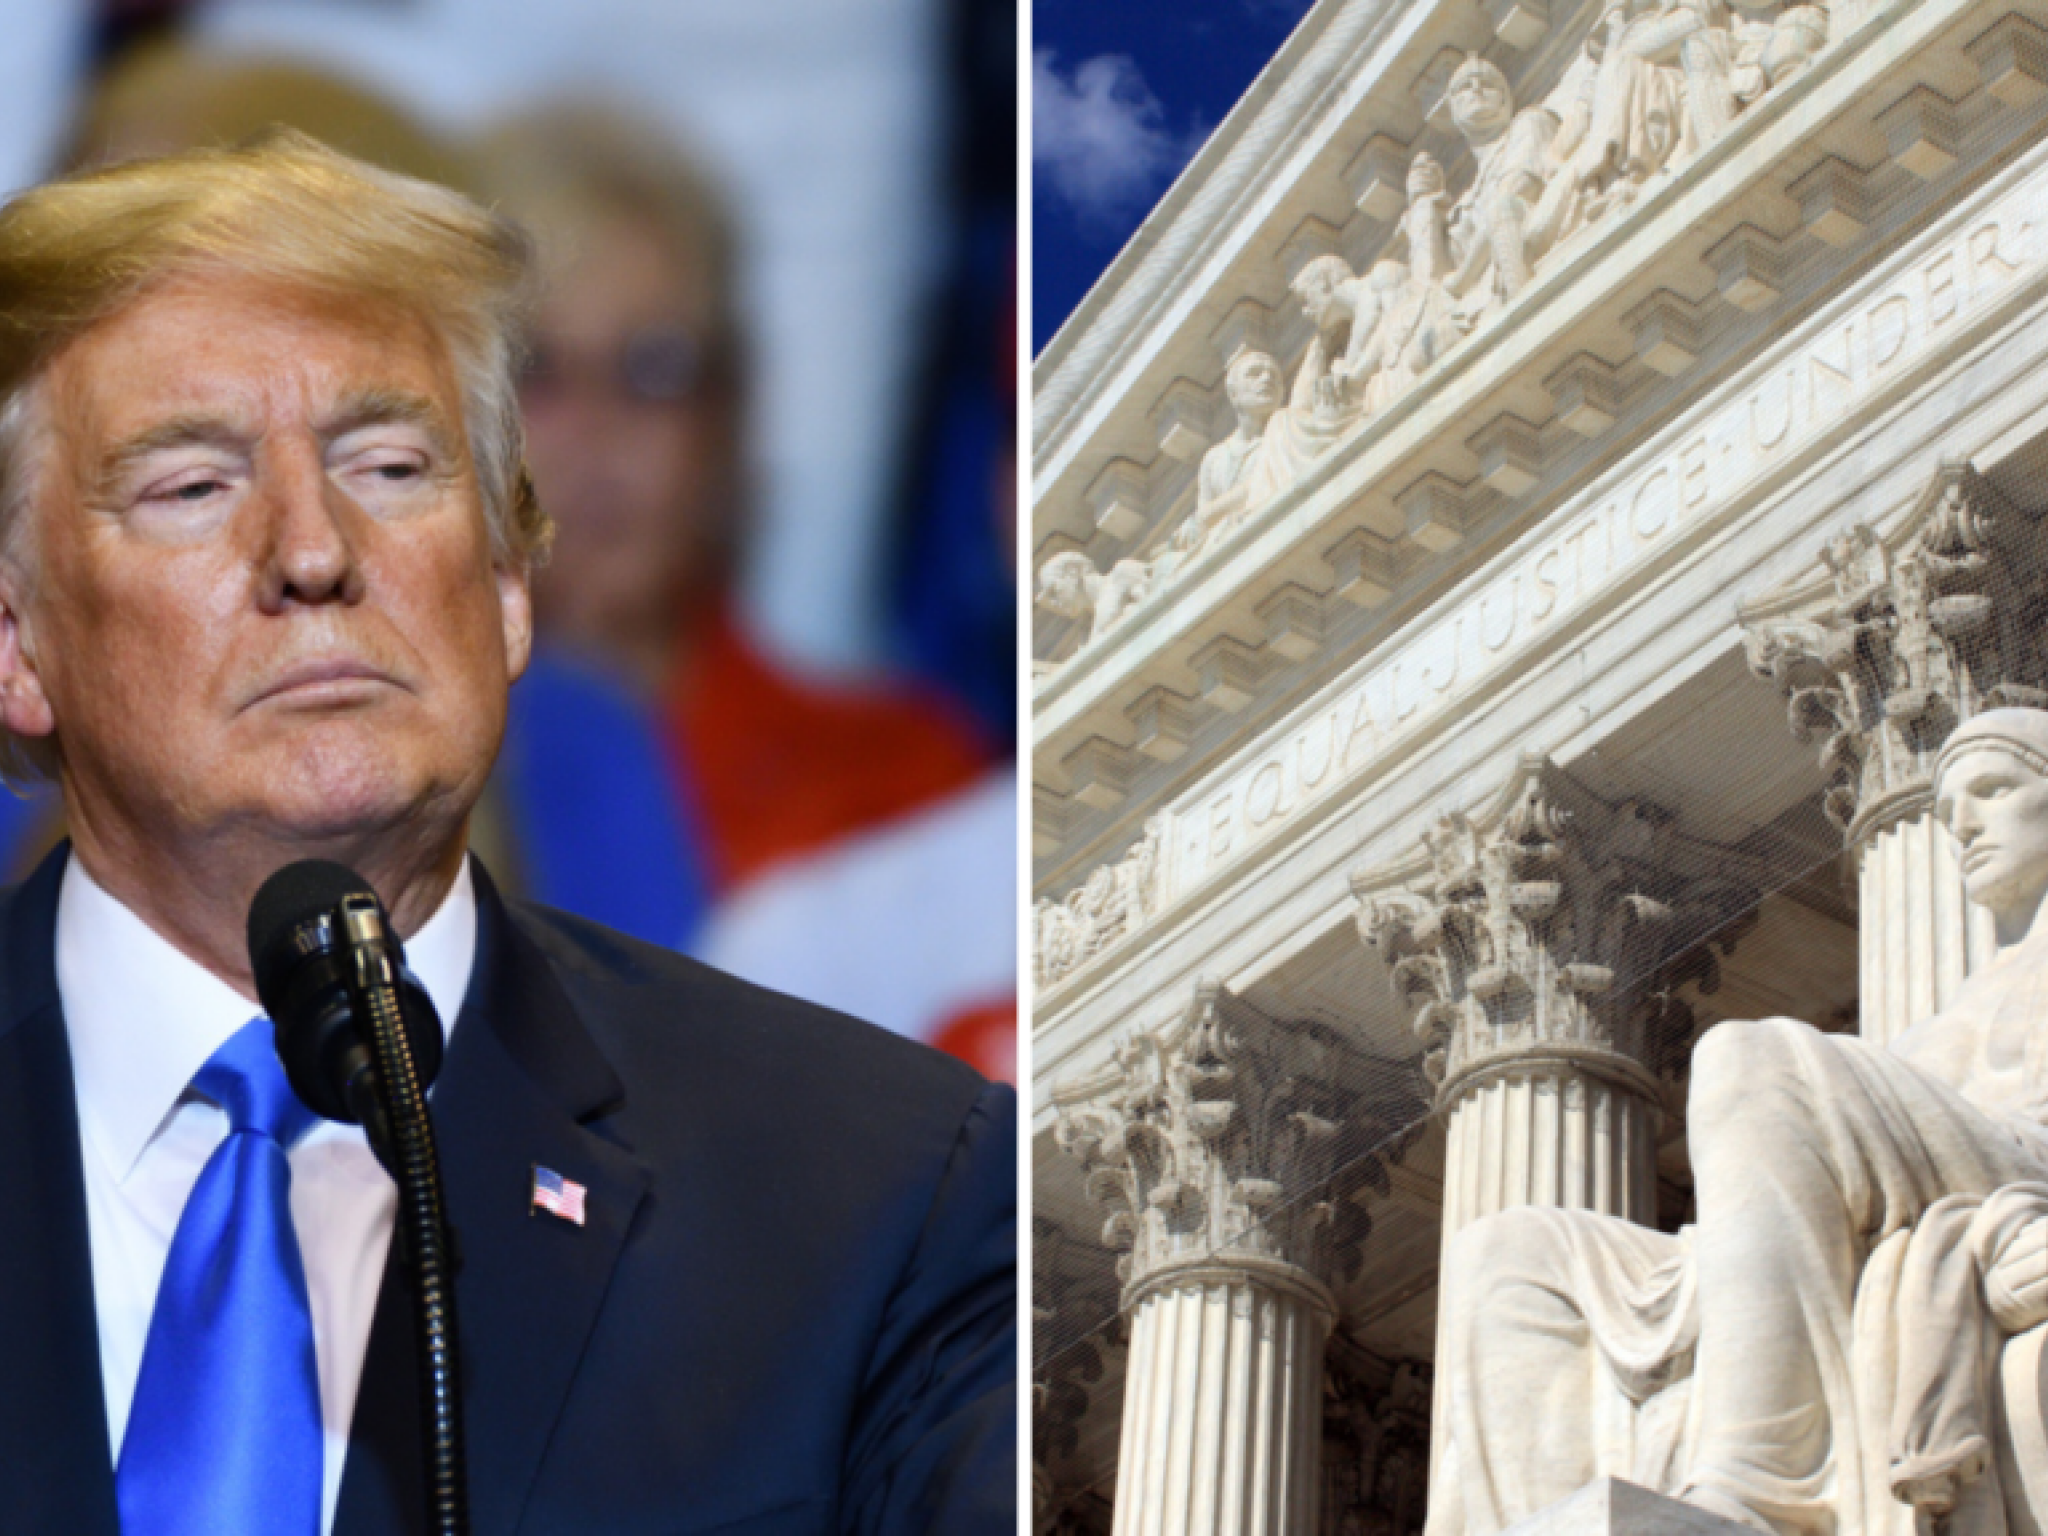  trump-supreme-court-immunity-ruling-makes-him-proud-to-be-an-american-critics-argue-he-is-now-above-the-law-pelosi-says-insult-to-the-vision-of-our-founders 